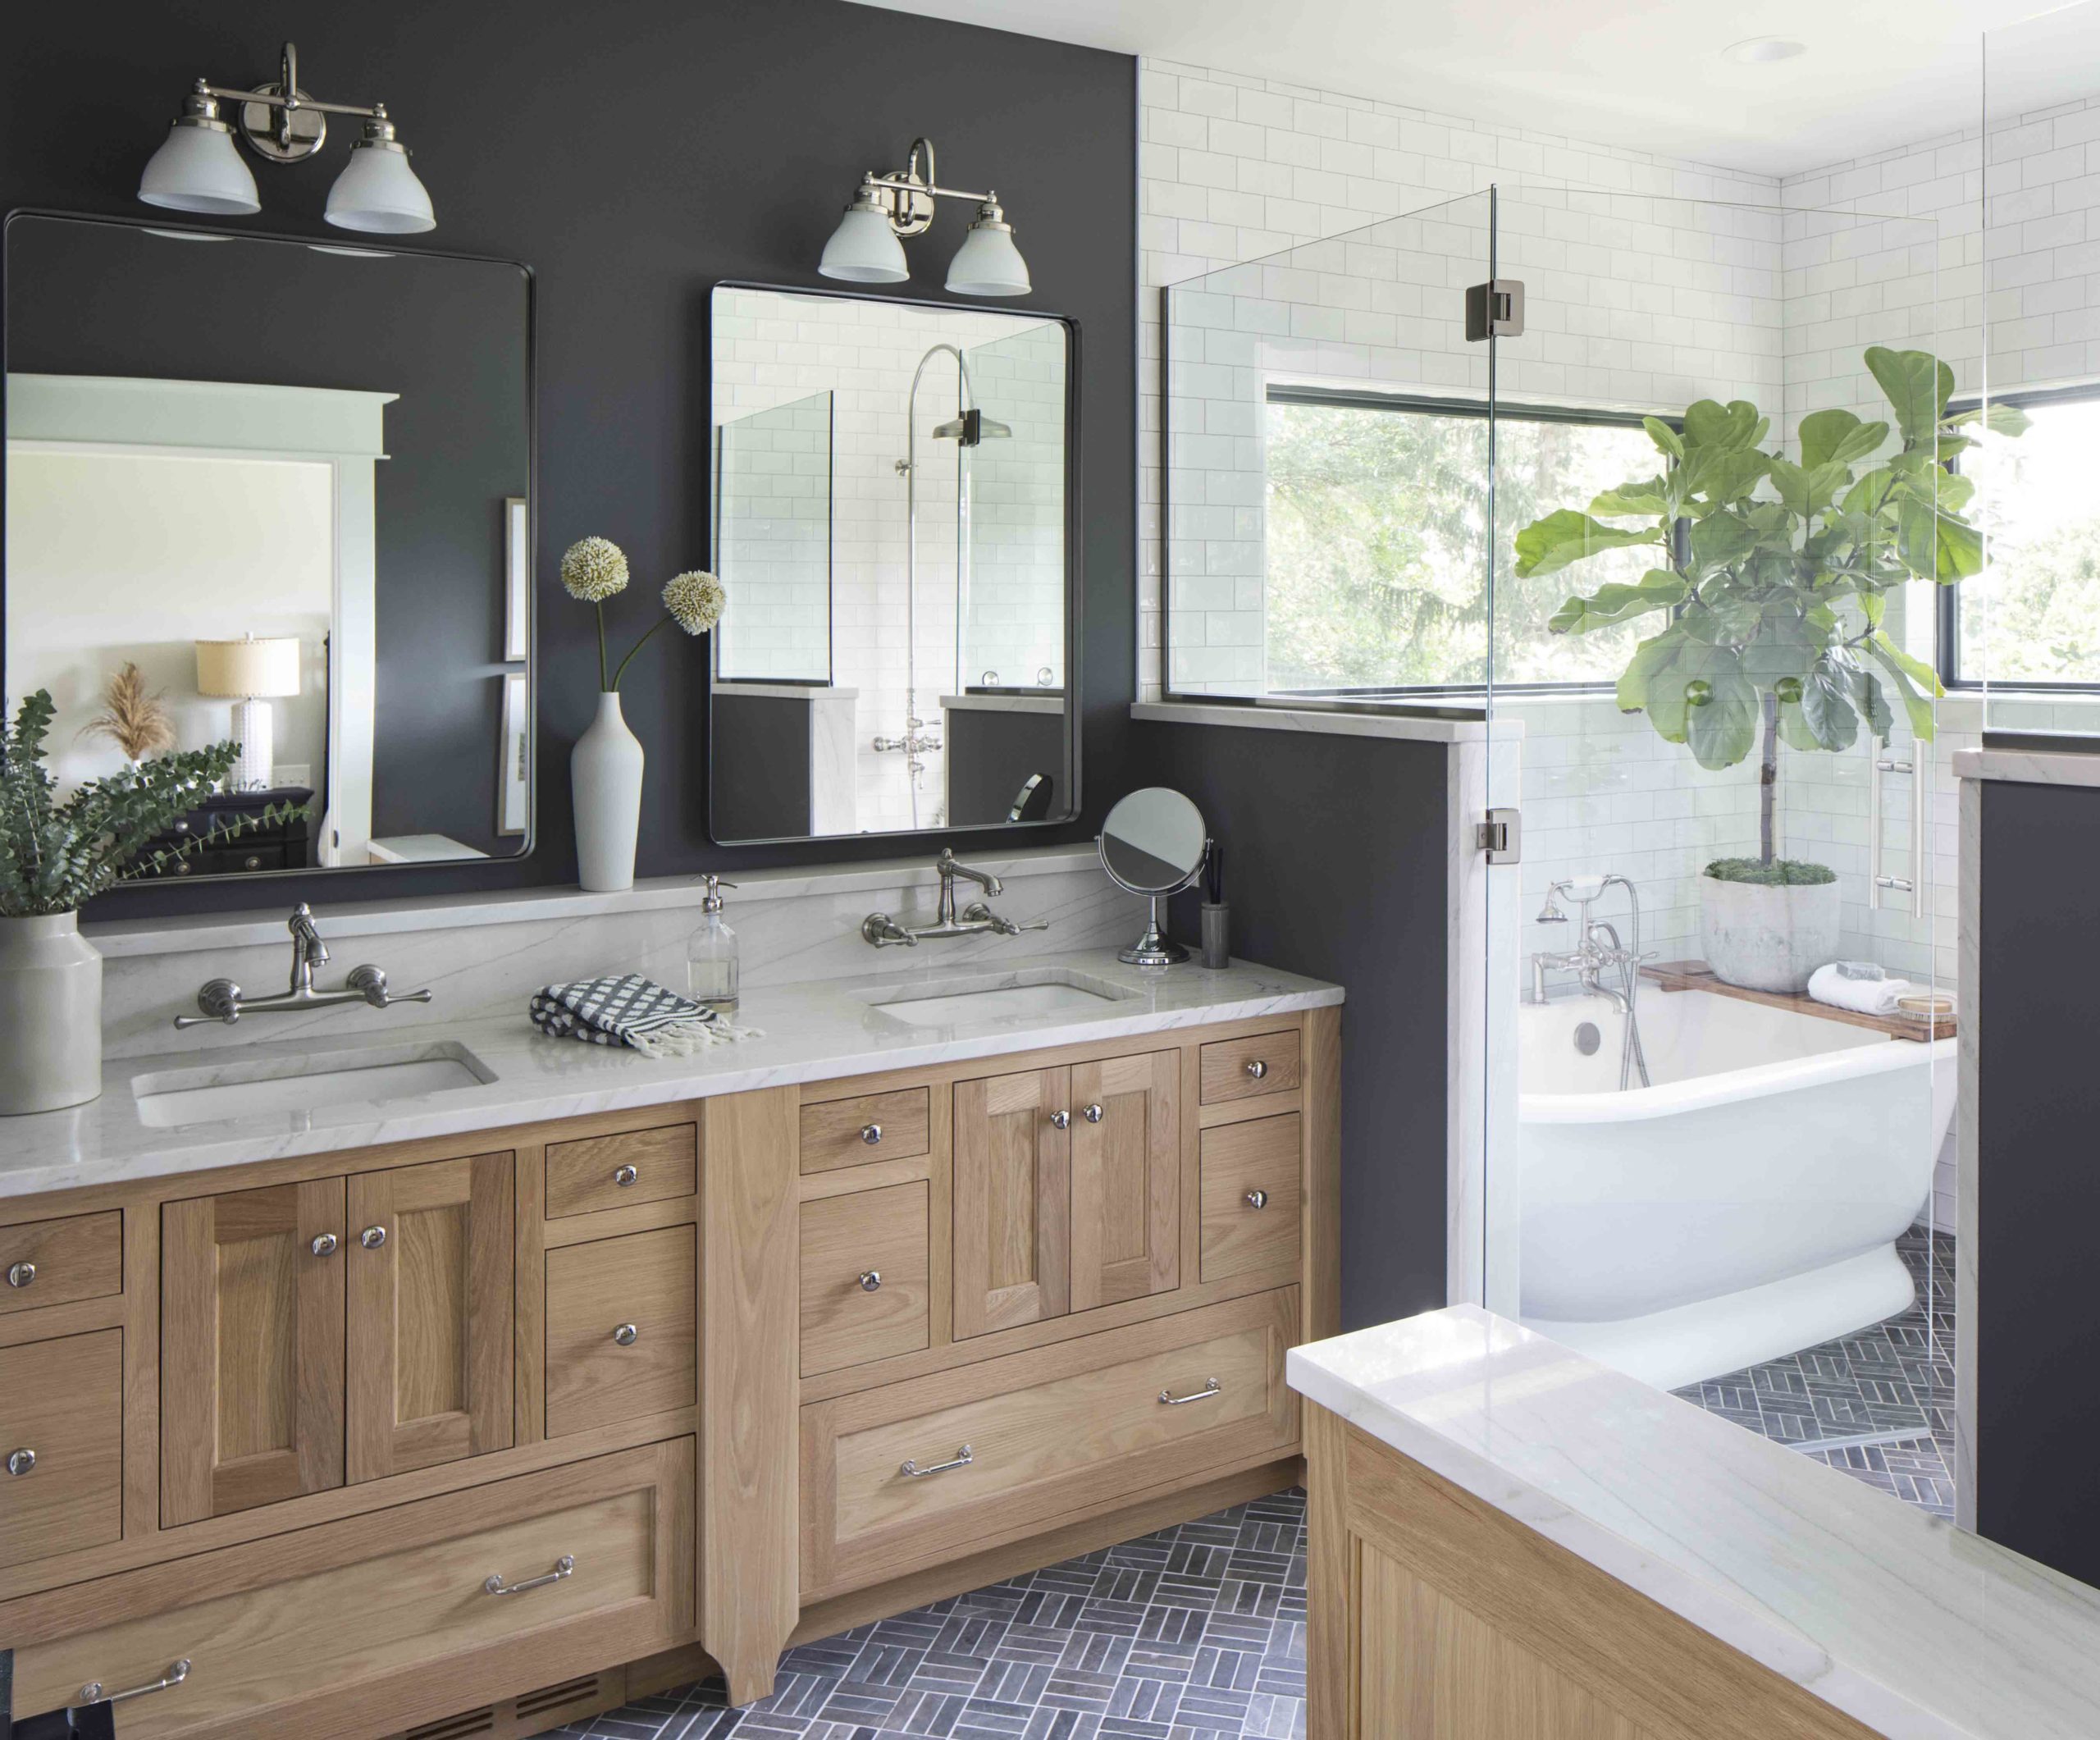 A prairie transitional custom home with a black and white bathroom featuring a tub and sink.